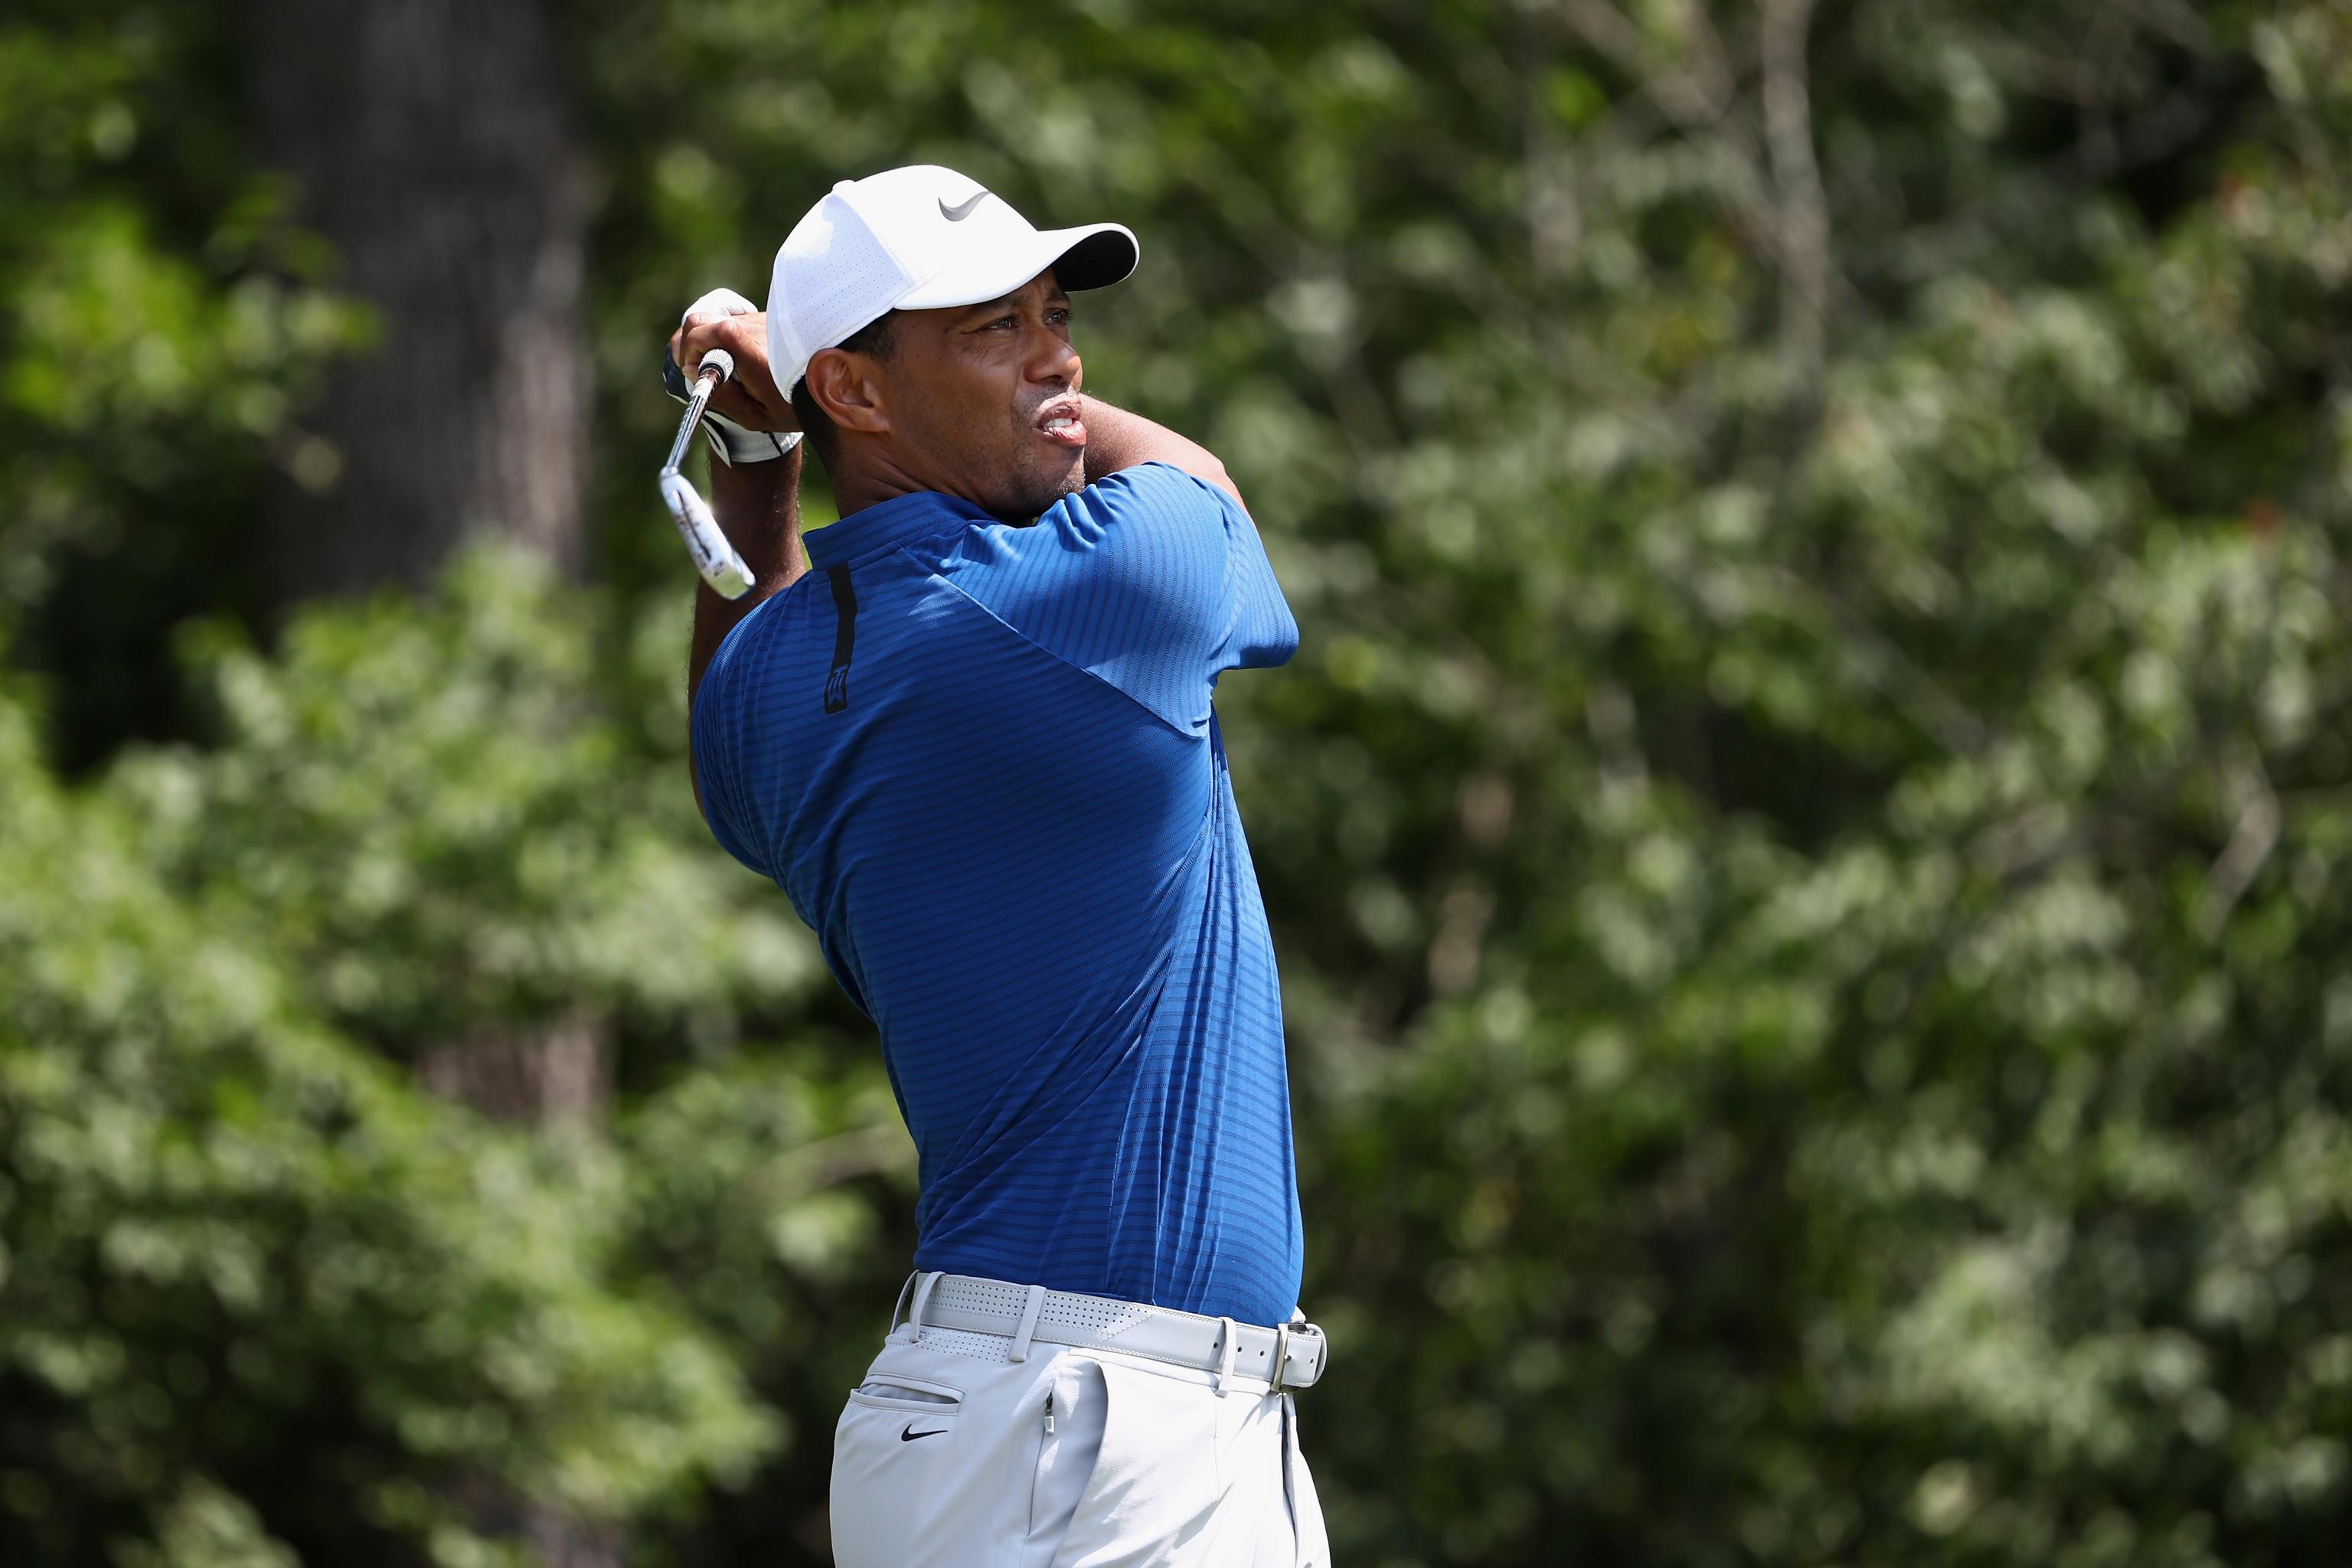 Tiger Woods In Contention At Pga Championship 2018 After Strong Round 3 Bleacher Report Latest News Videos And Highlights